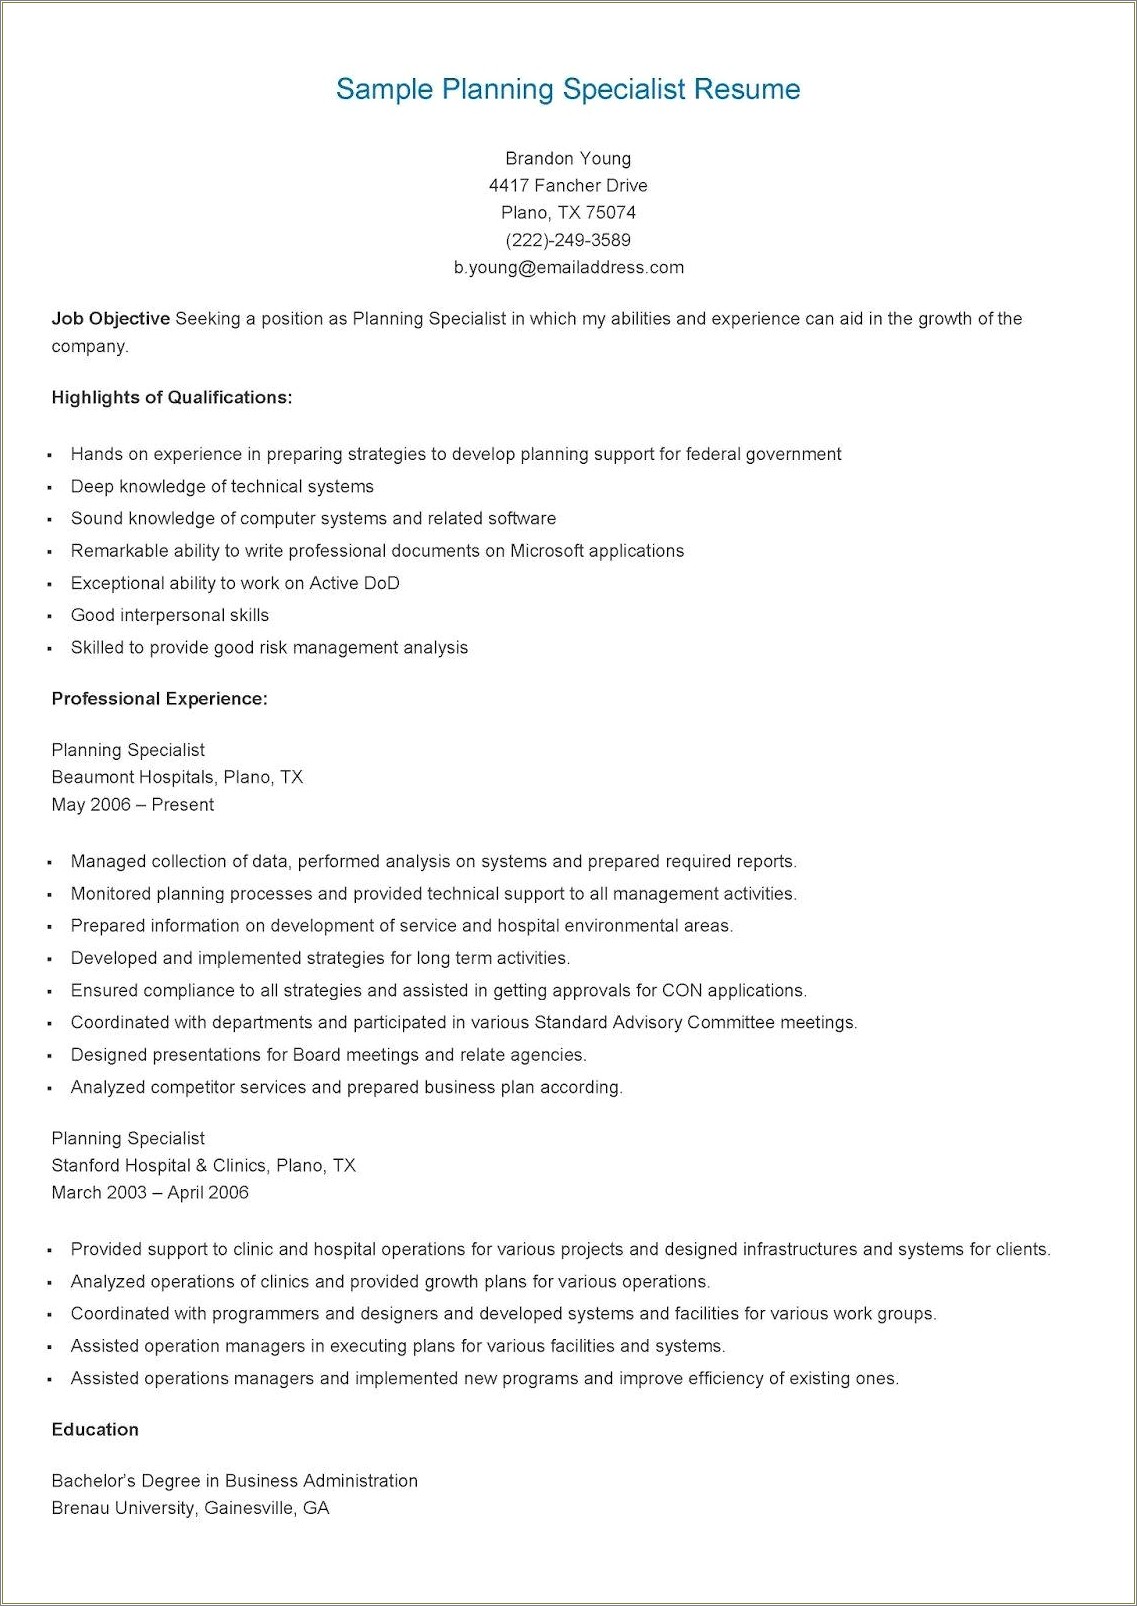 Computer Support Specialist Resume Objective